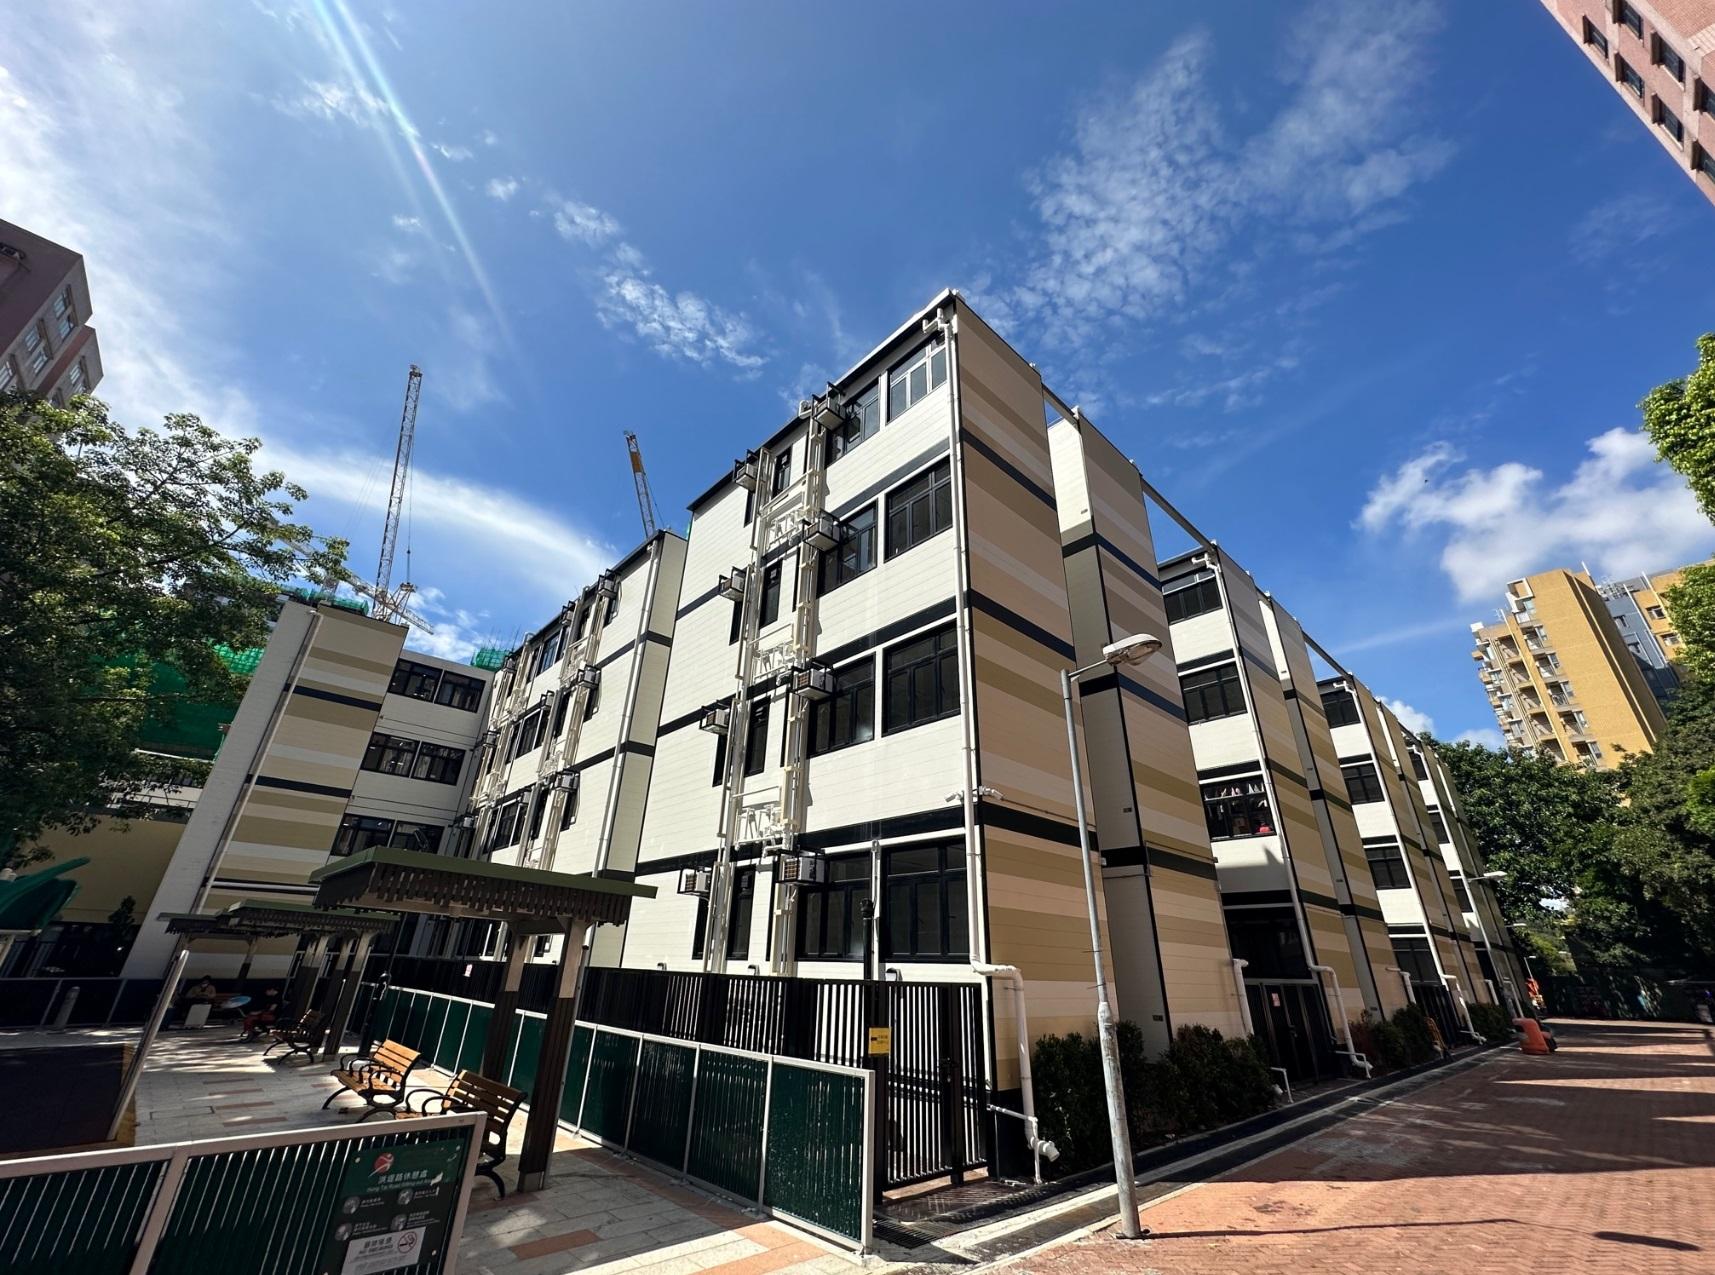 The Housing Bureau will organise a Transitional Housing Open Day on September 24 (Sunday) and provide shuttle bus services for interested parties to visit the transitional housing project Yan Oi House at Hung Shui Kiu in Yuen Long. Photo shows the Yan Oi House.